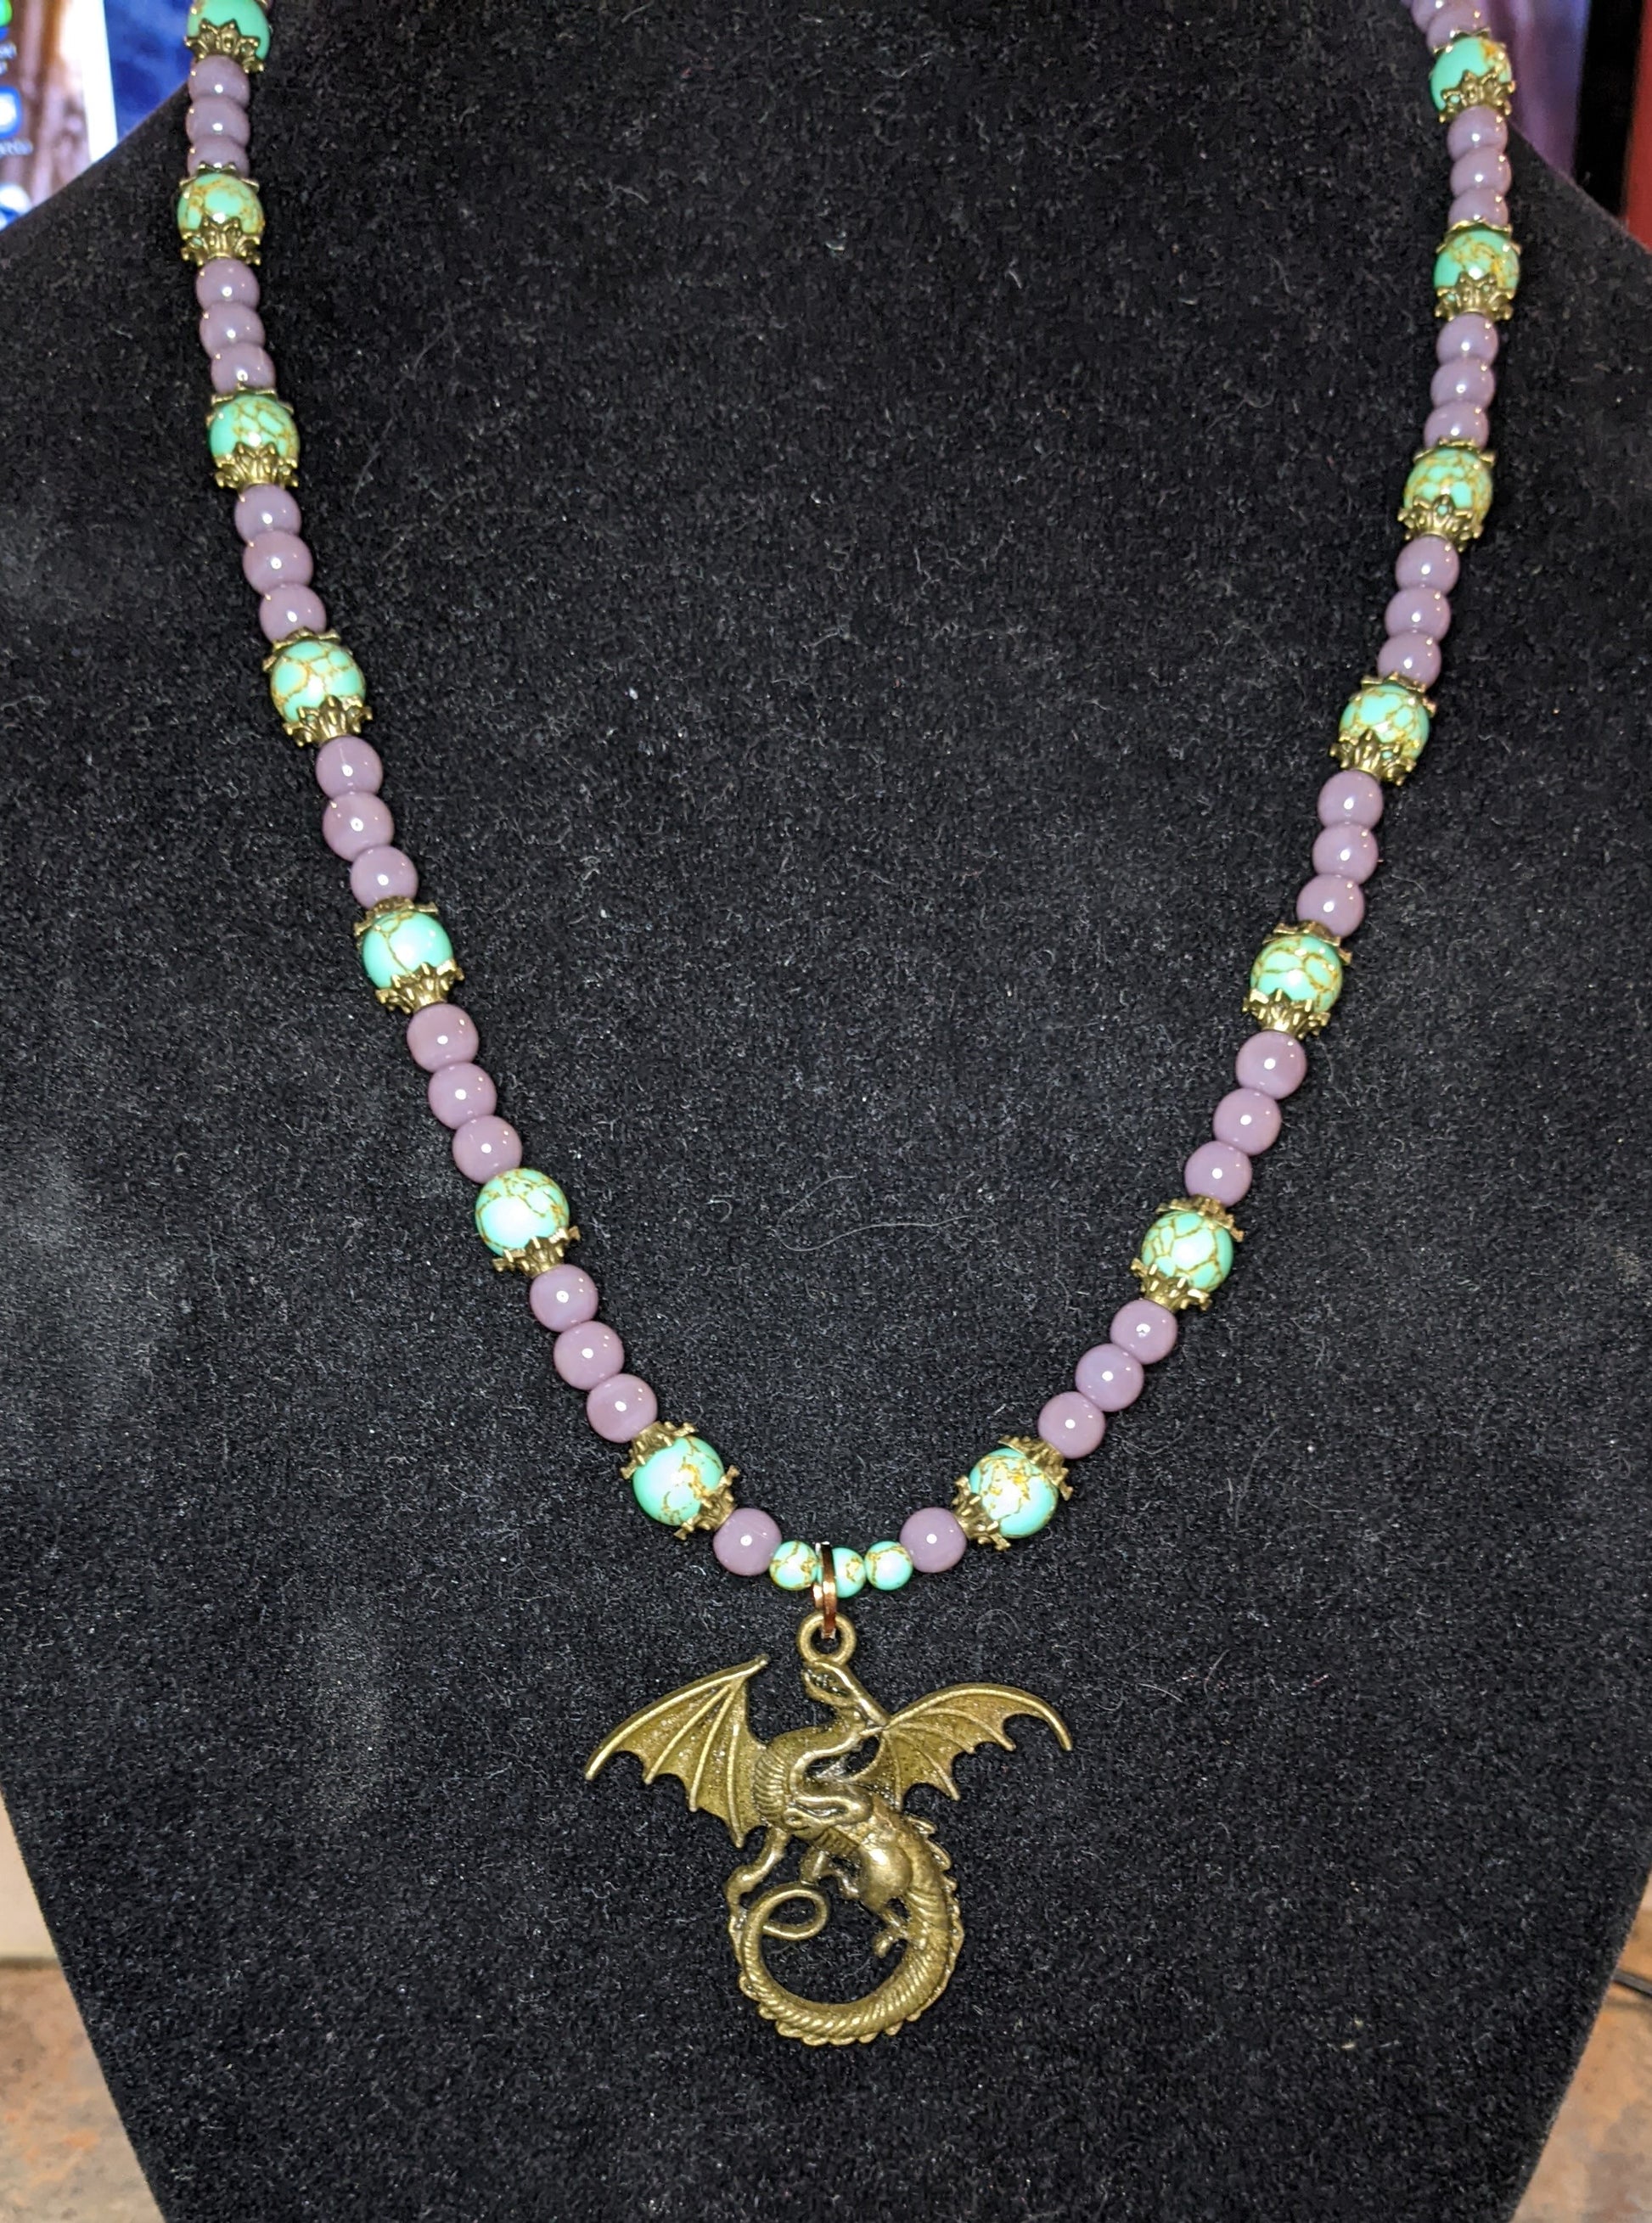 Purple and blue beaded necklace with a bronze dragon pendant 